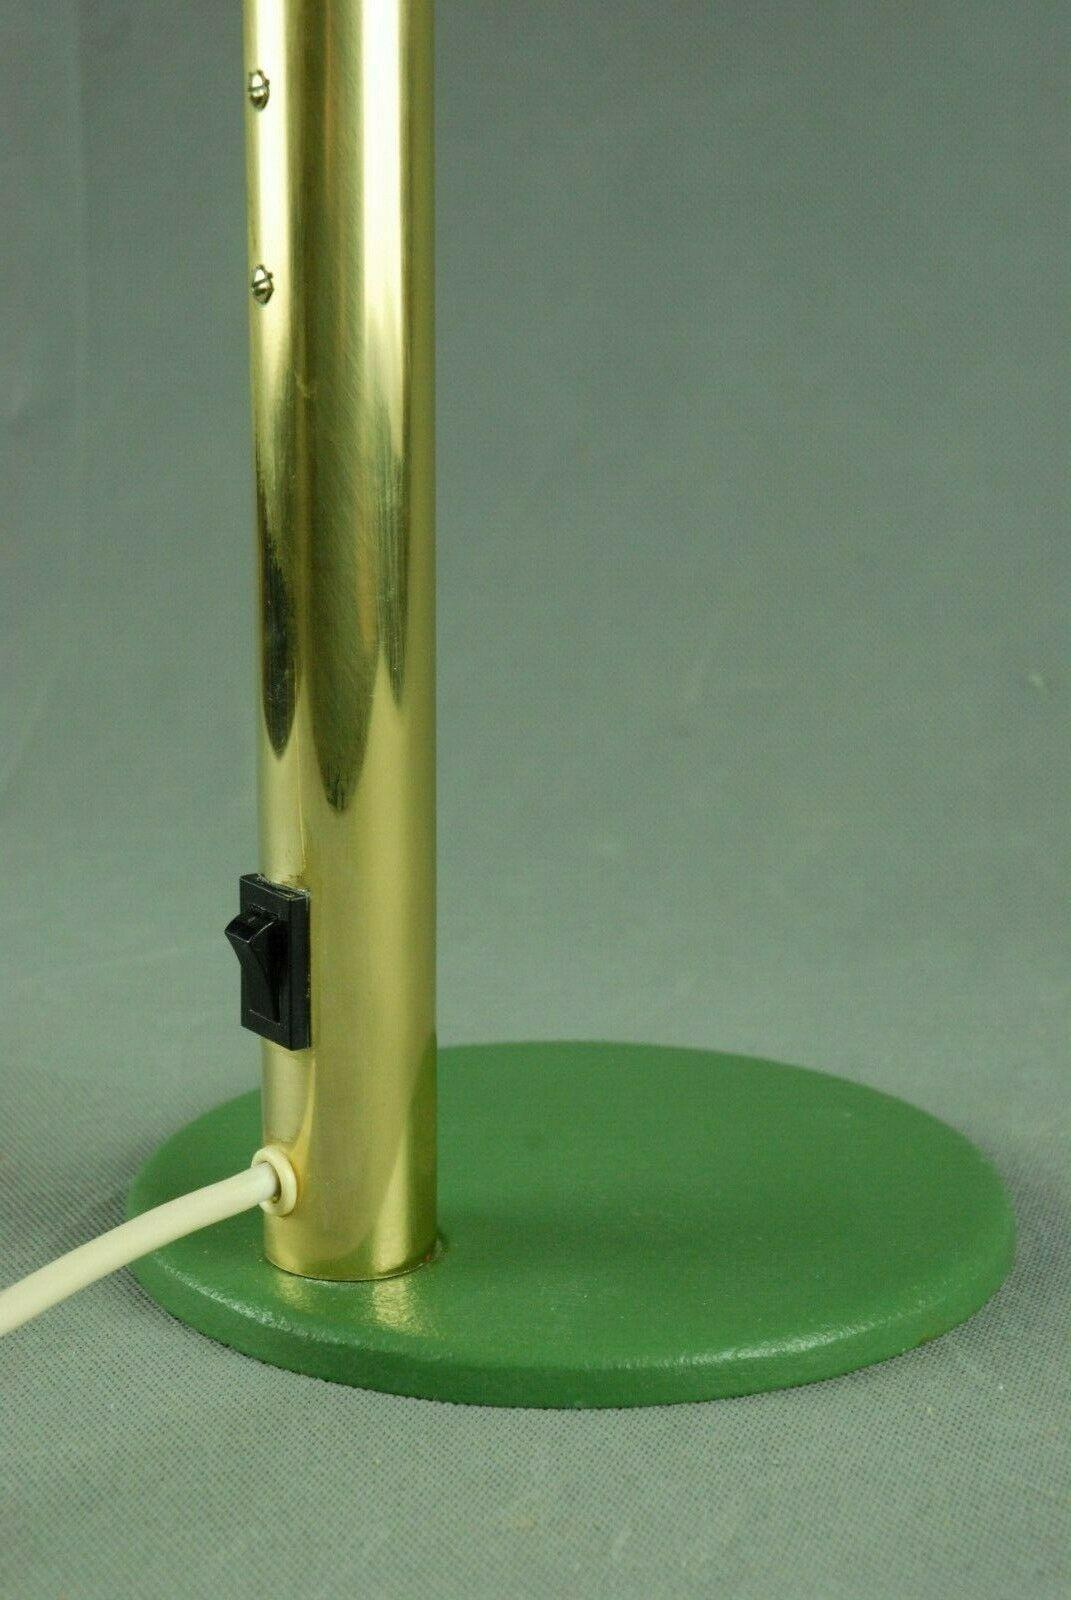 An unusual 1960s green desk lamp with brass adjustable stem and domed shade. Manufactured by Kaiser Leuchten, Germany.

Currently wired for the UK.